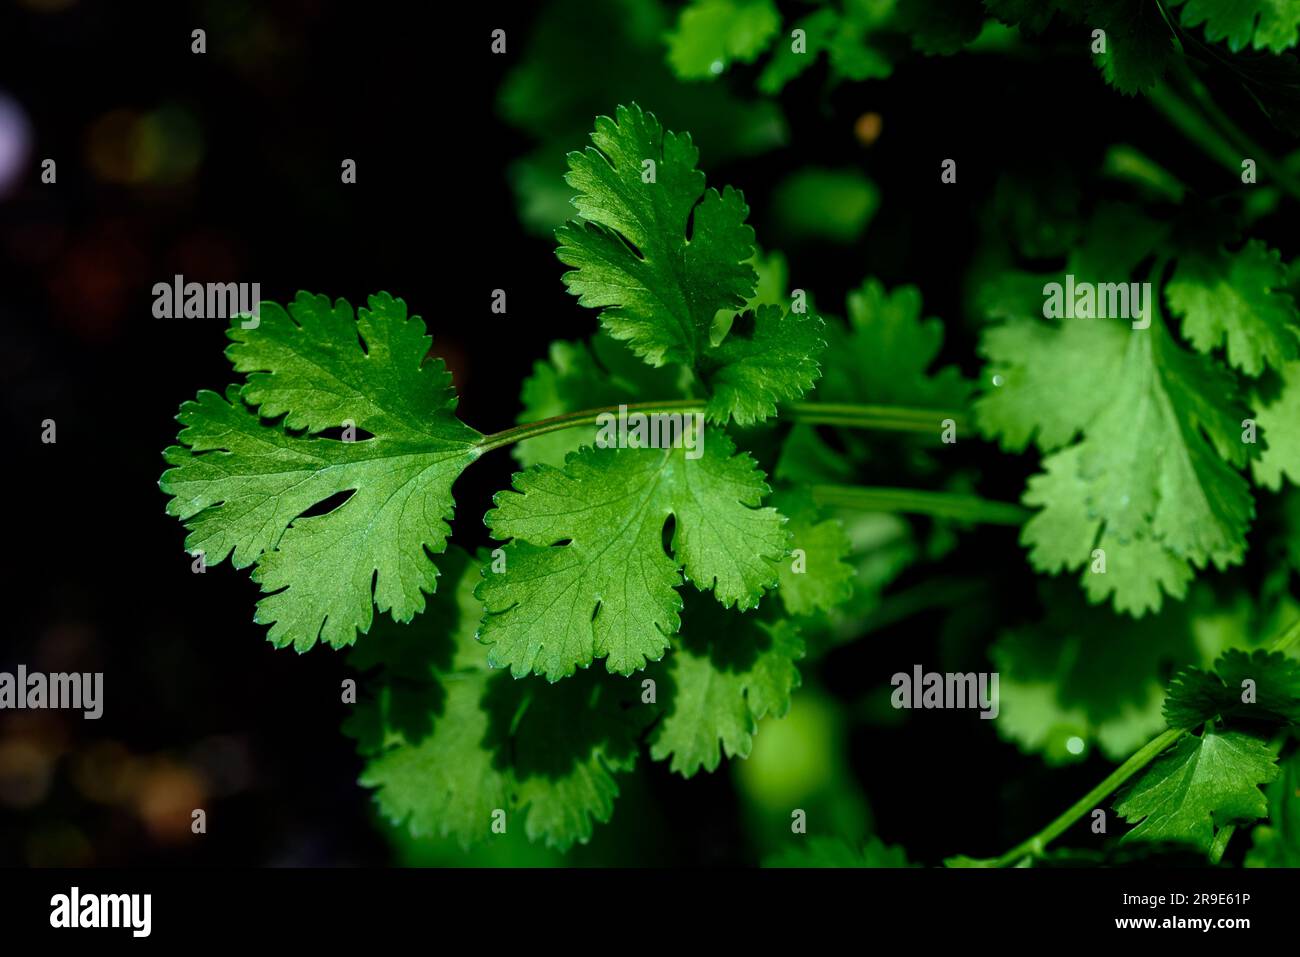 Coriander Coriandrum sativum, also known as cilantro is an annual herb in the family Apiaceae. All parts of the plant are edible, but the fresh leaves Stock Photo